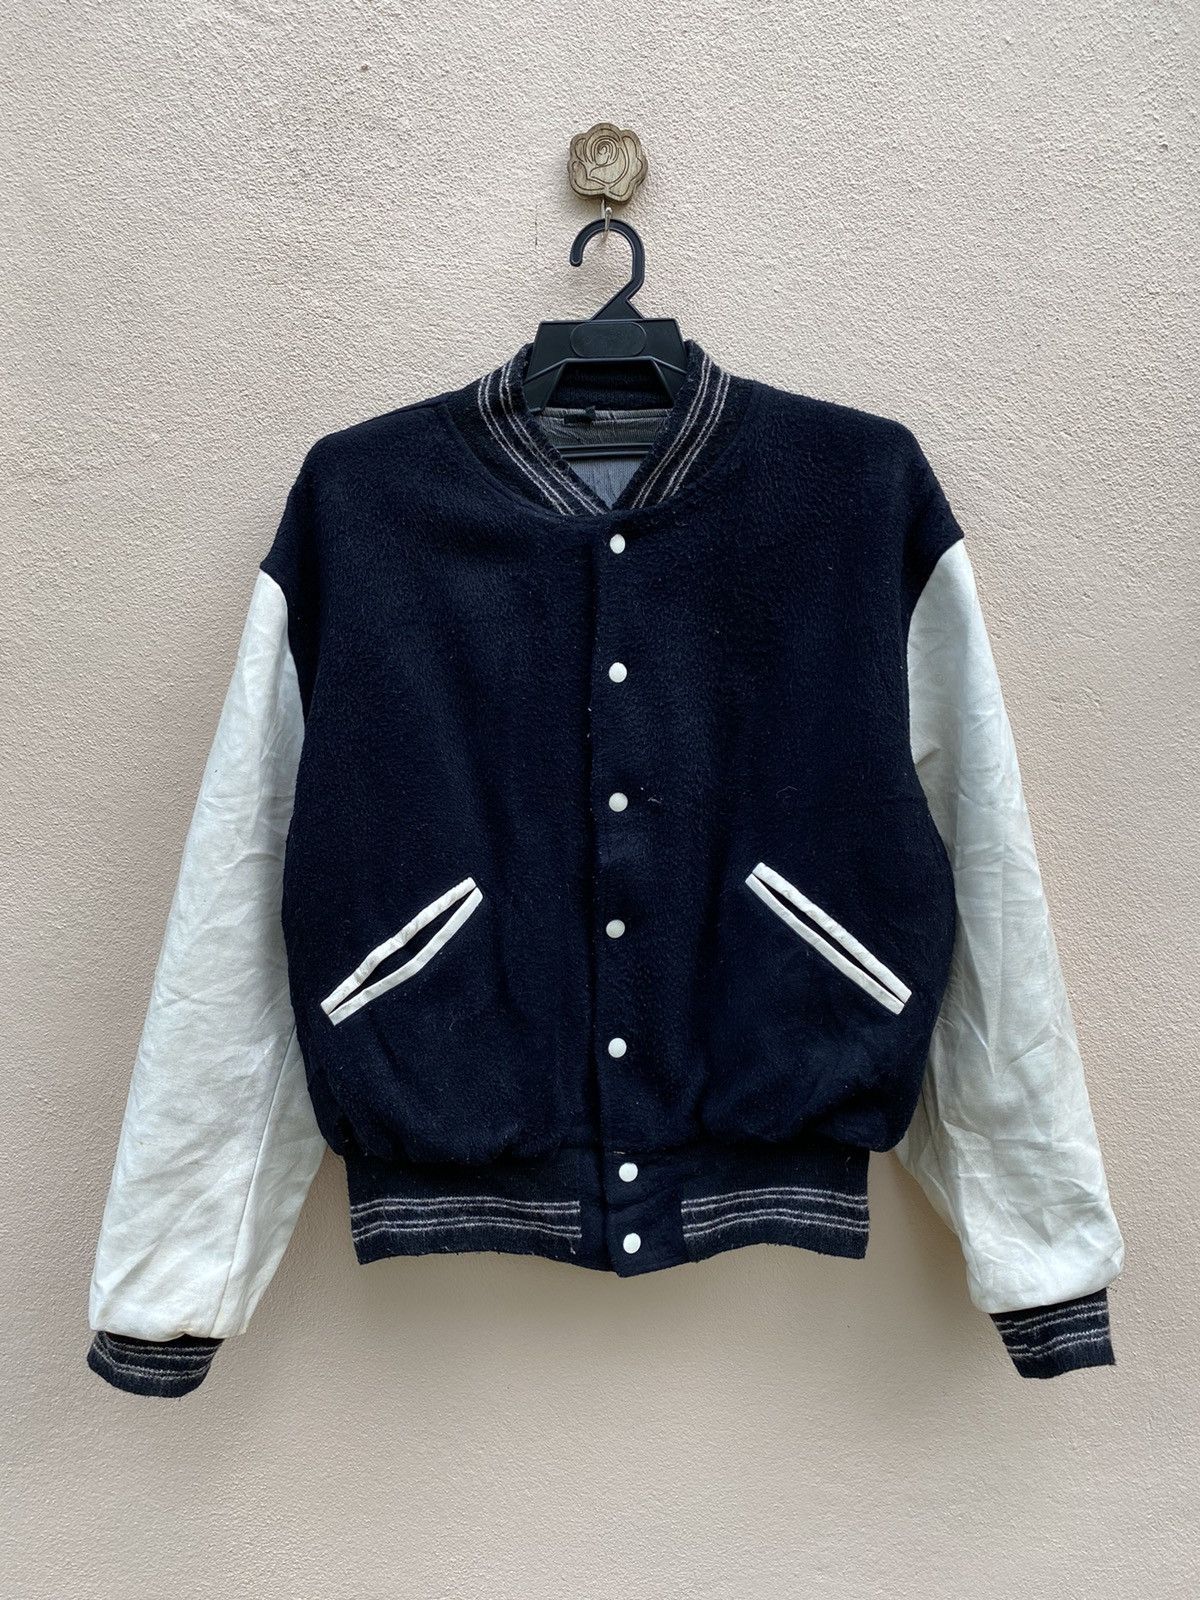 Vintage RARE 1970s BUTWIN THE JACKET FOR CHAMPION Varsity Jacket Size US M / EU 48-50 / 2 - 2 Preview